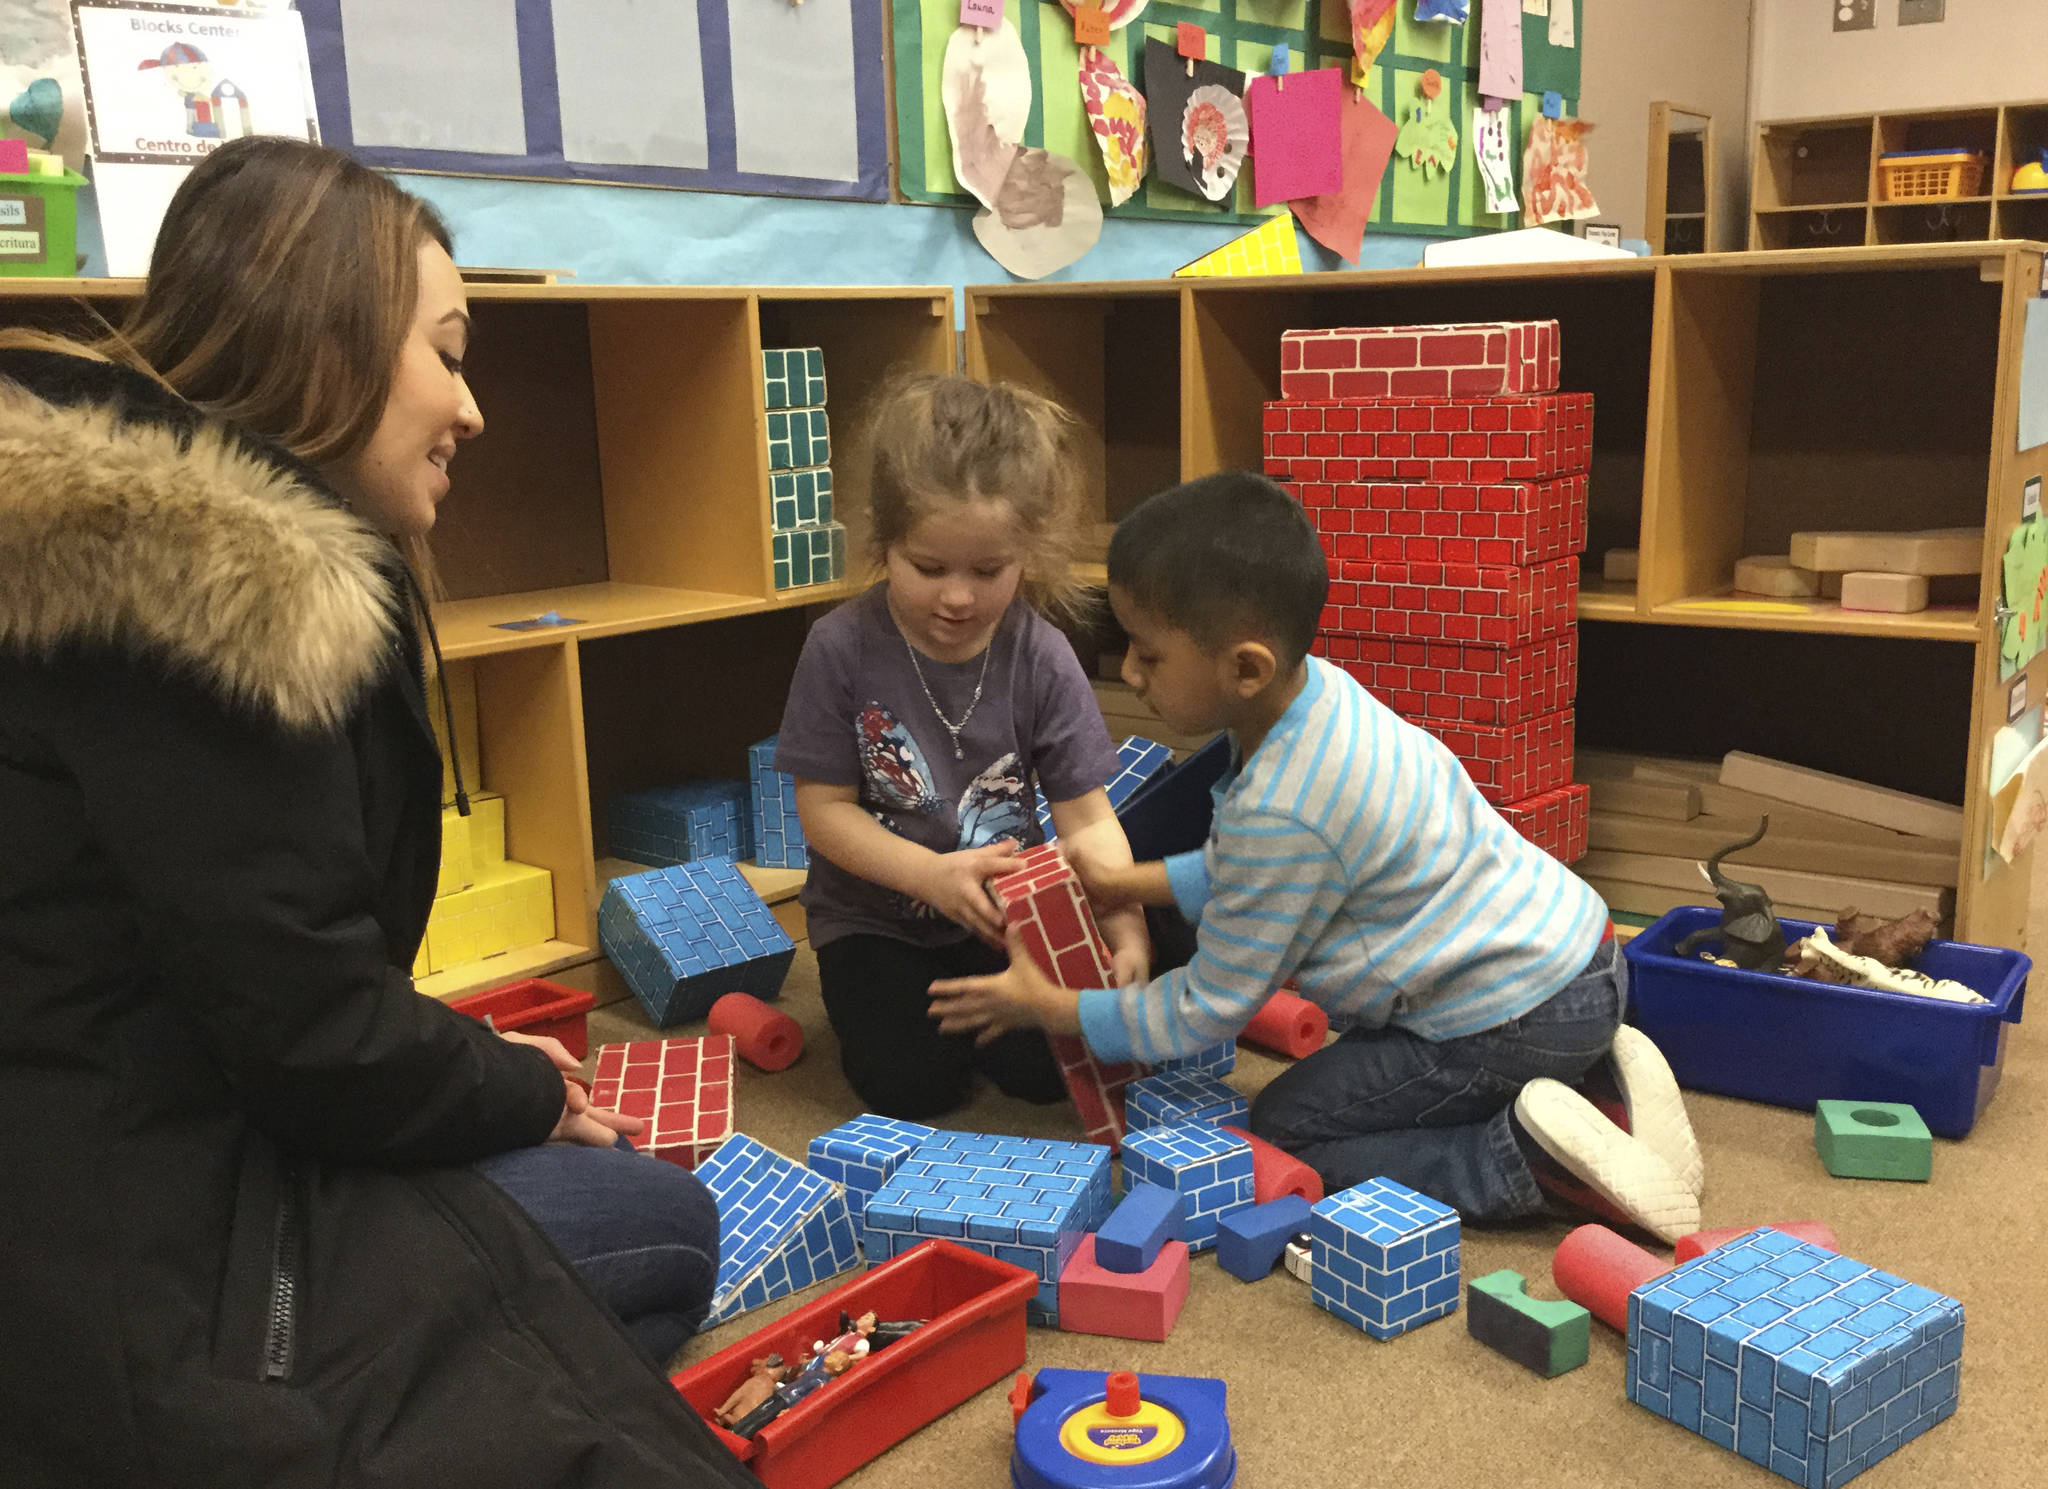 Arlington ECEAP teacher Tina Stivala-Bliss looks on as 4-year-old preschoolers Joonbug Blunt and Jonathan Solano work together to build a block tower.